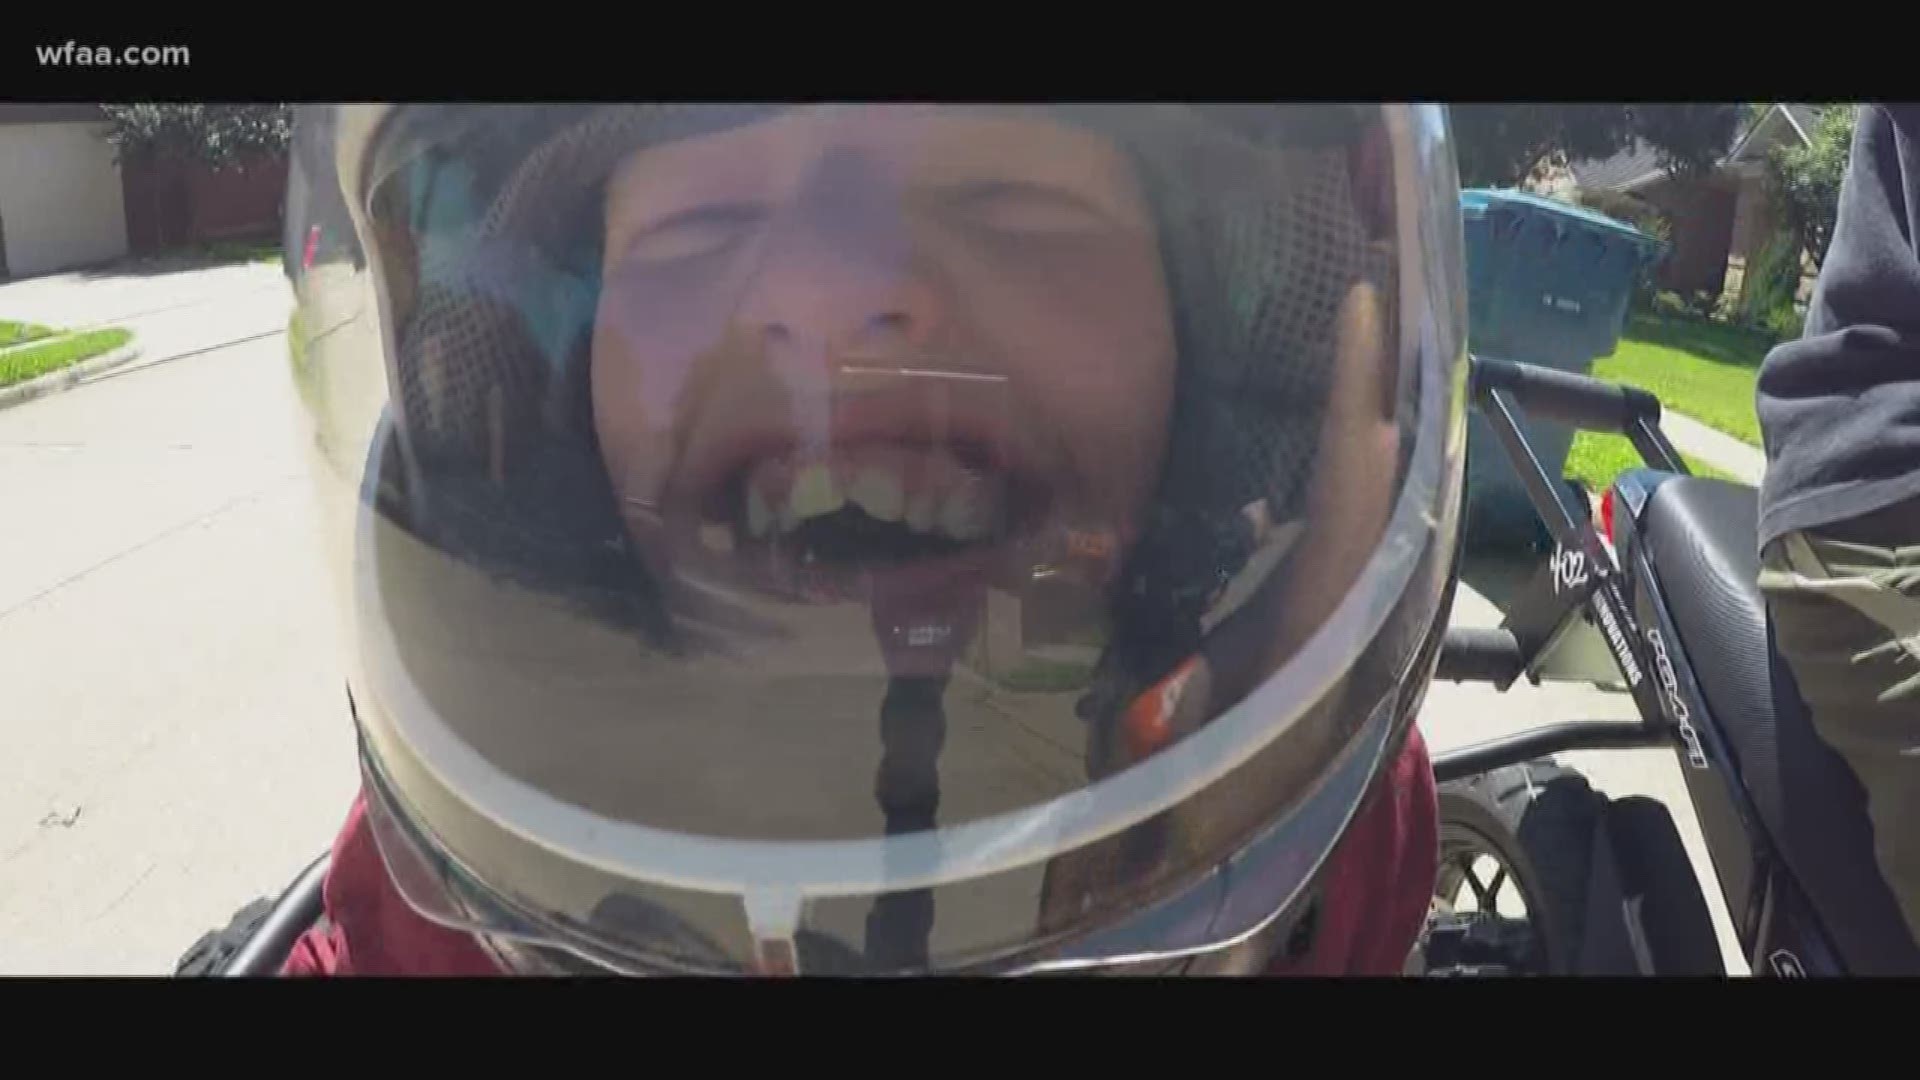 Family gets creative to share the thrill of riding a motorcycle for the first time